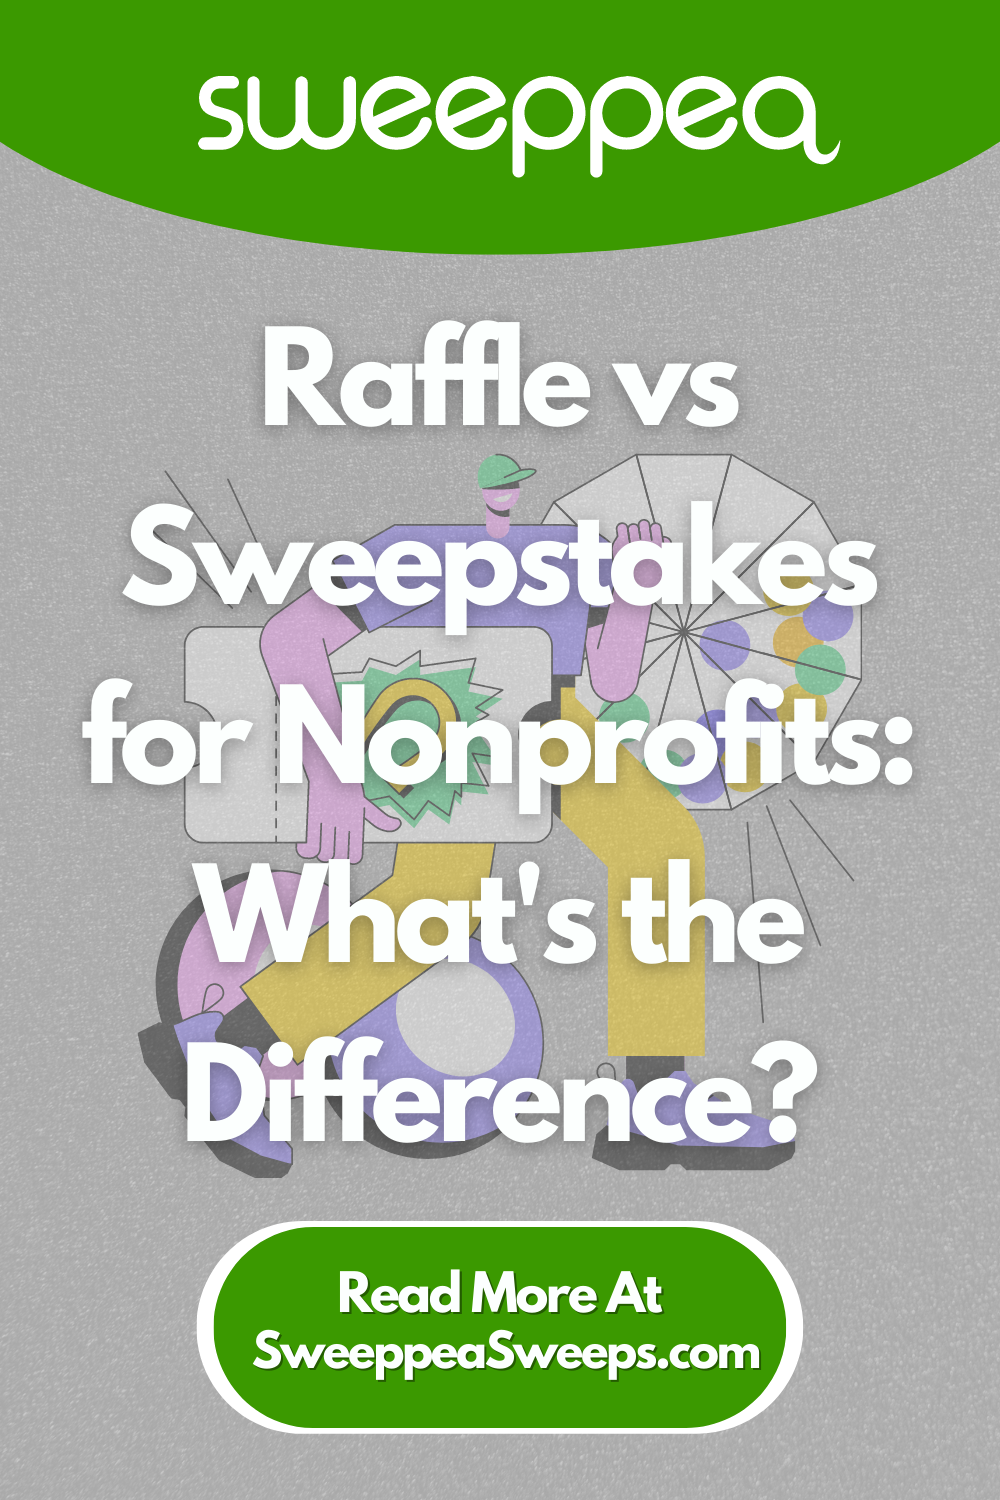 Raffle vs Sweepstakes for Nonprofits What's the Difference